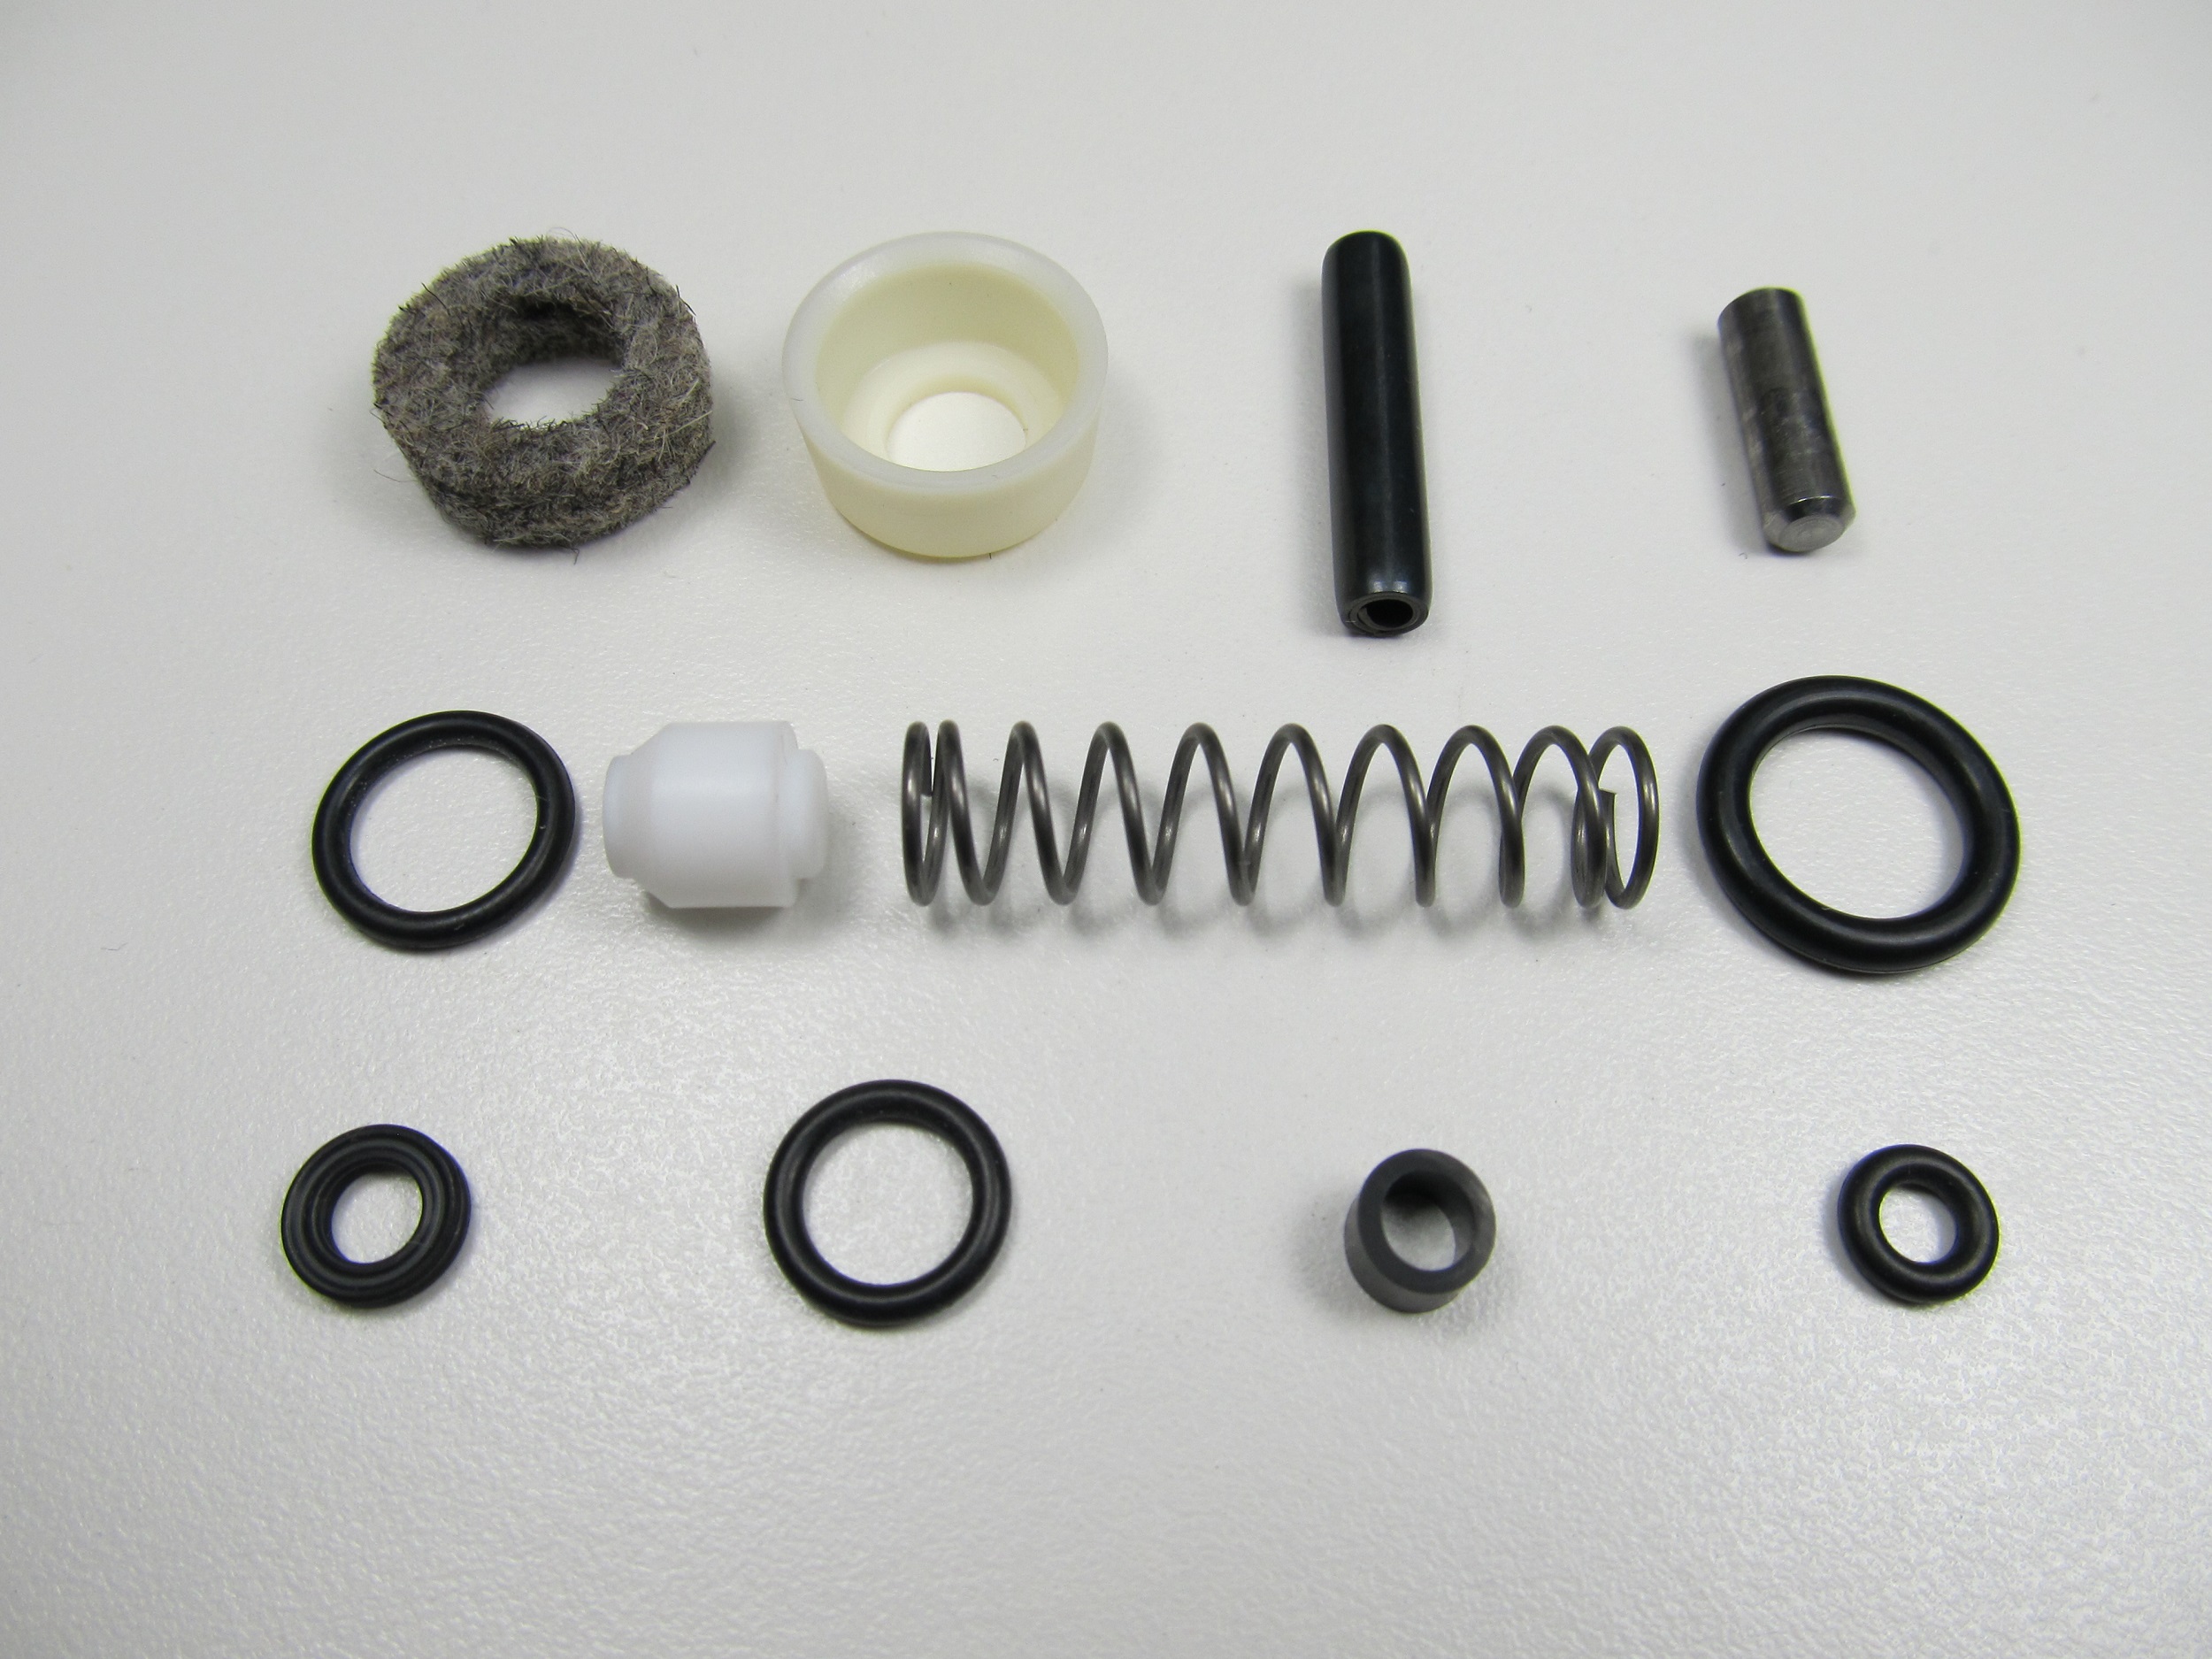 Crosman 1400 140 One O-Ring Seal Kit Parts List & Seal Guide Exploded View 